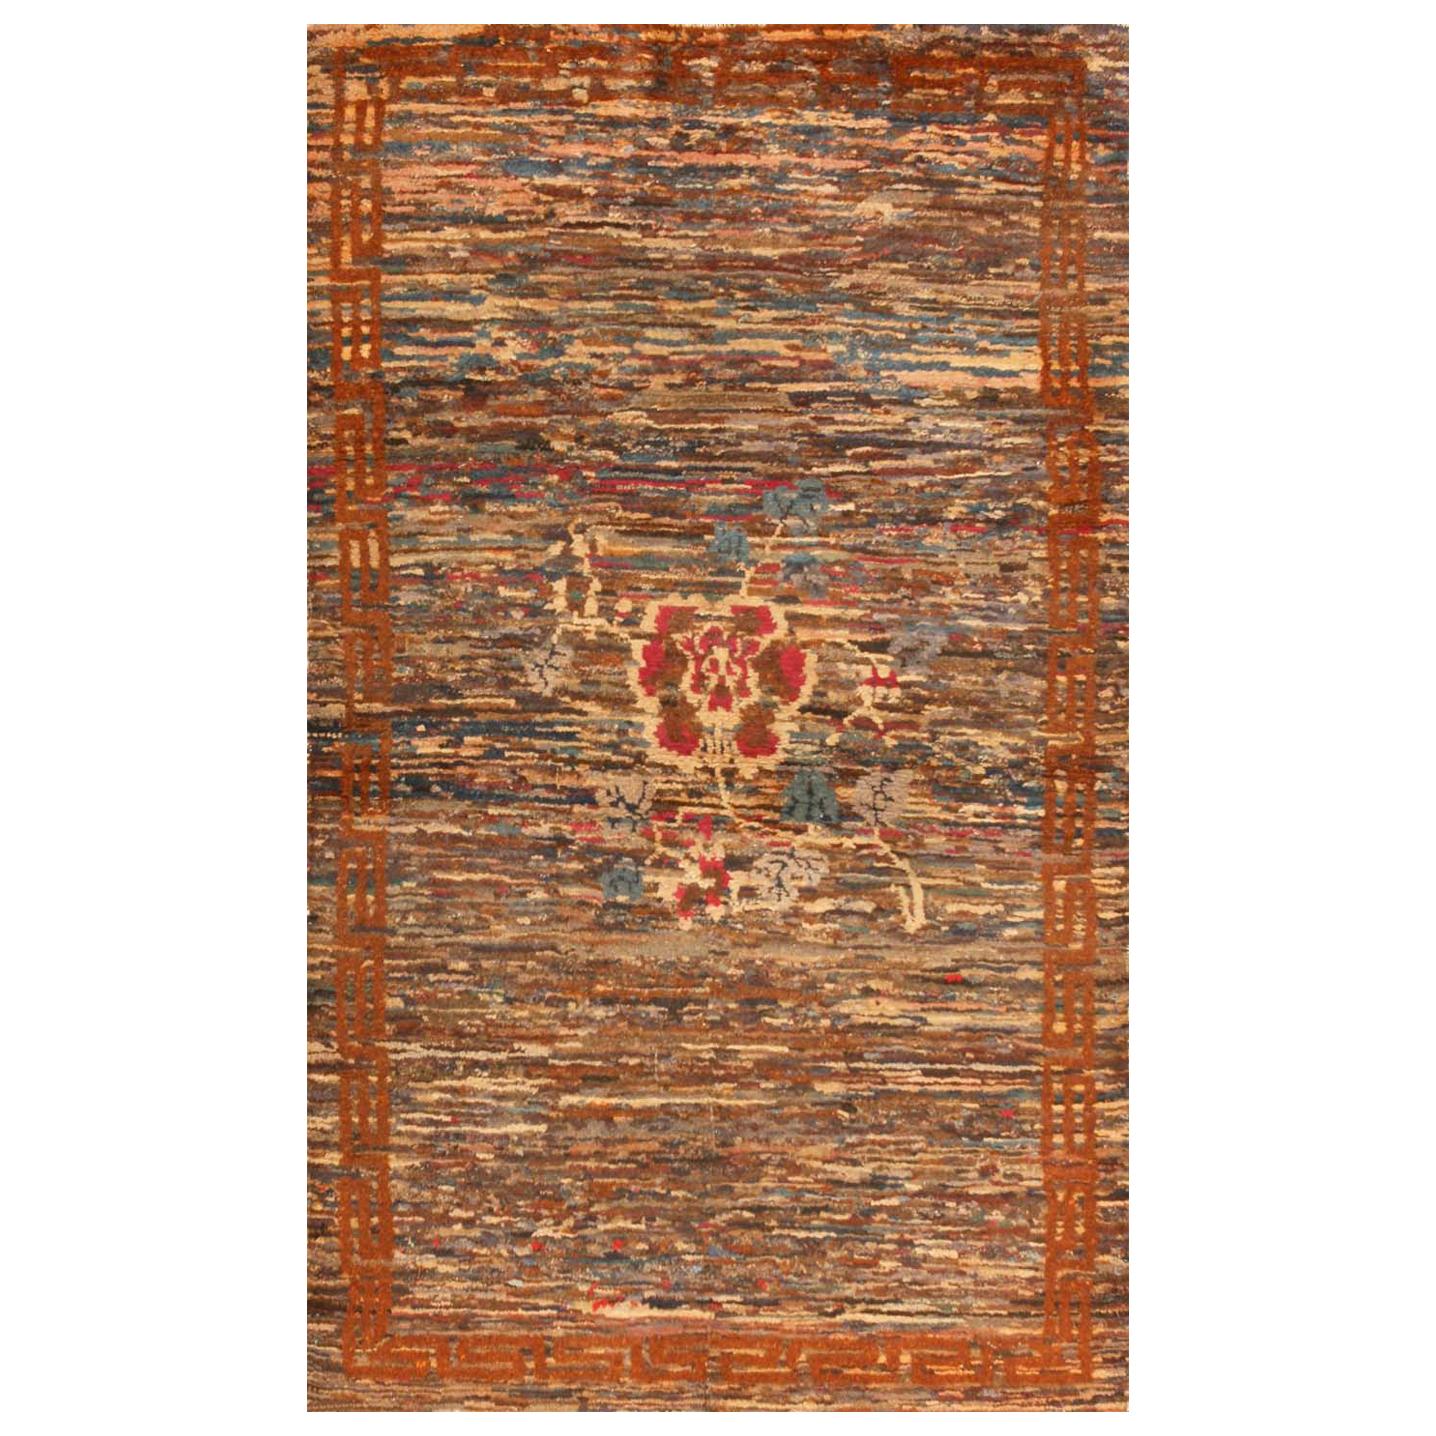 Antique Chinese Rug. Size: 3 ft 11 in x 6 ft 7 in (1.19 m x 2.01 m)